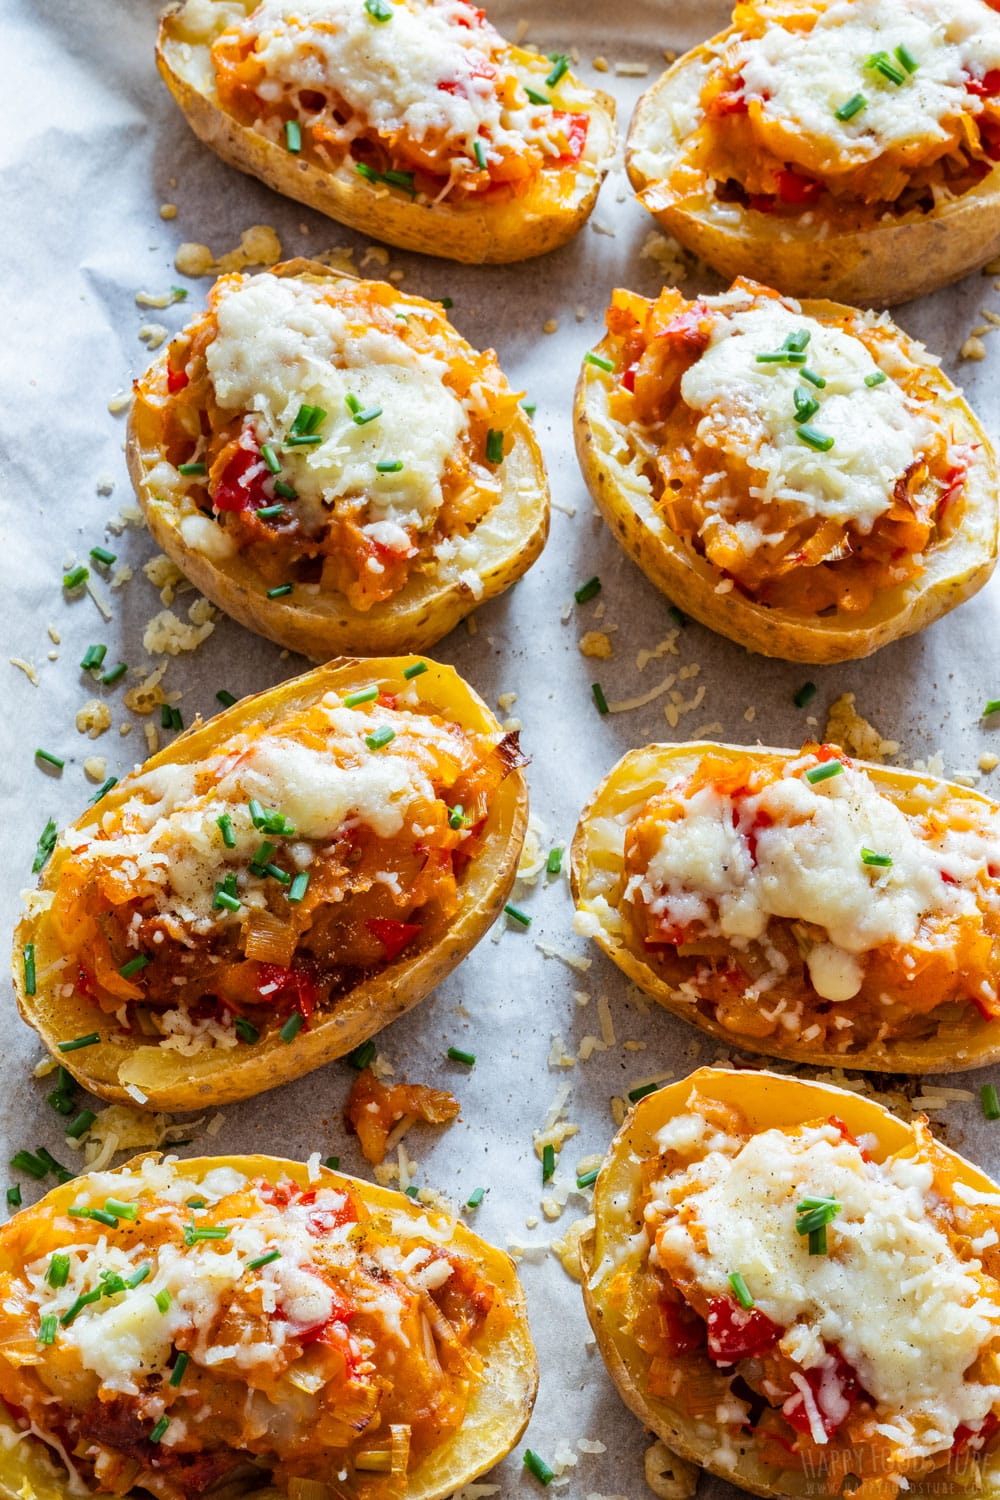 Double baked and stuffed potatoes topped with cheese and fresh chives.